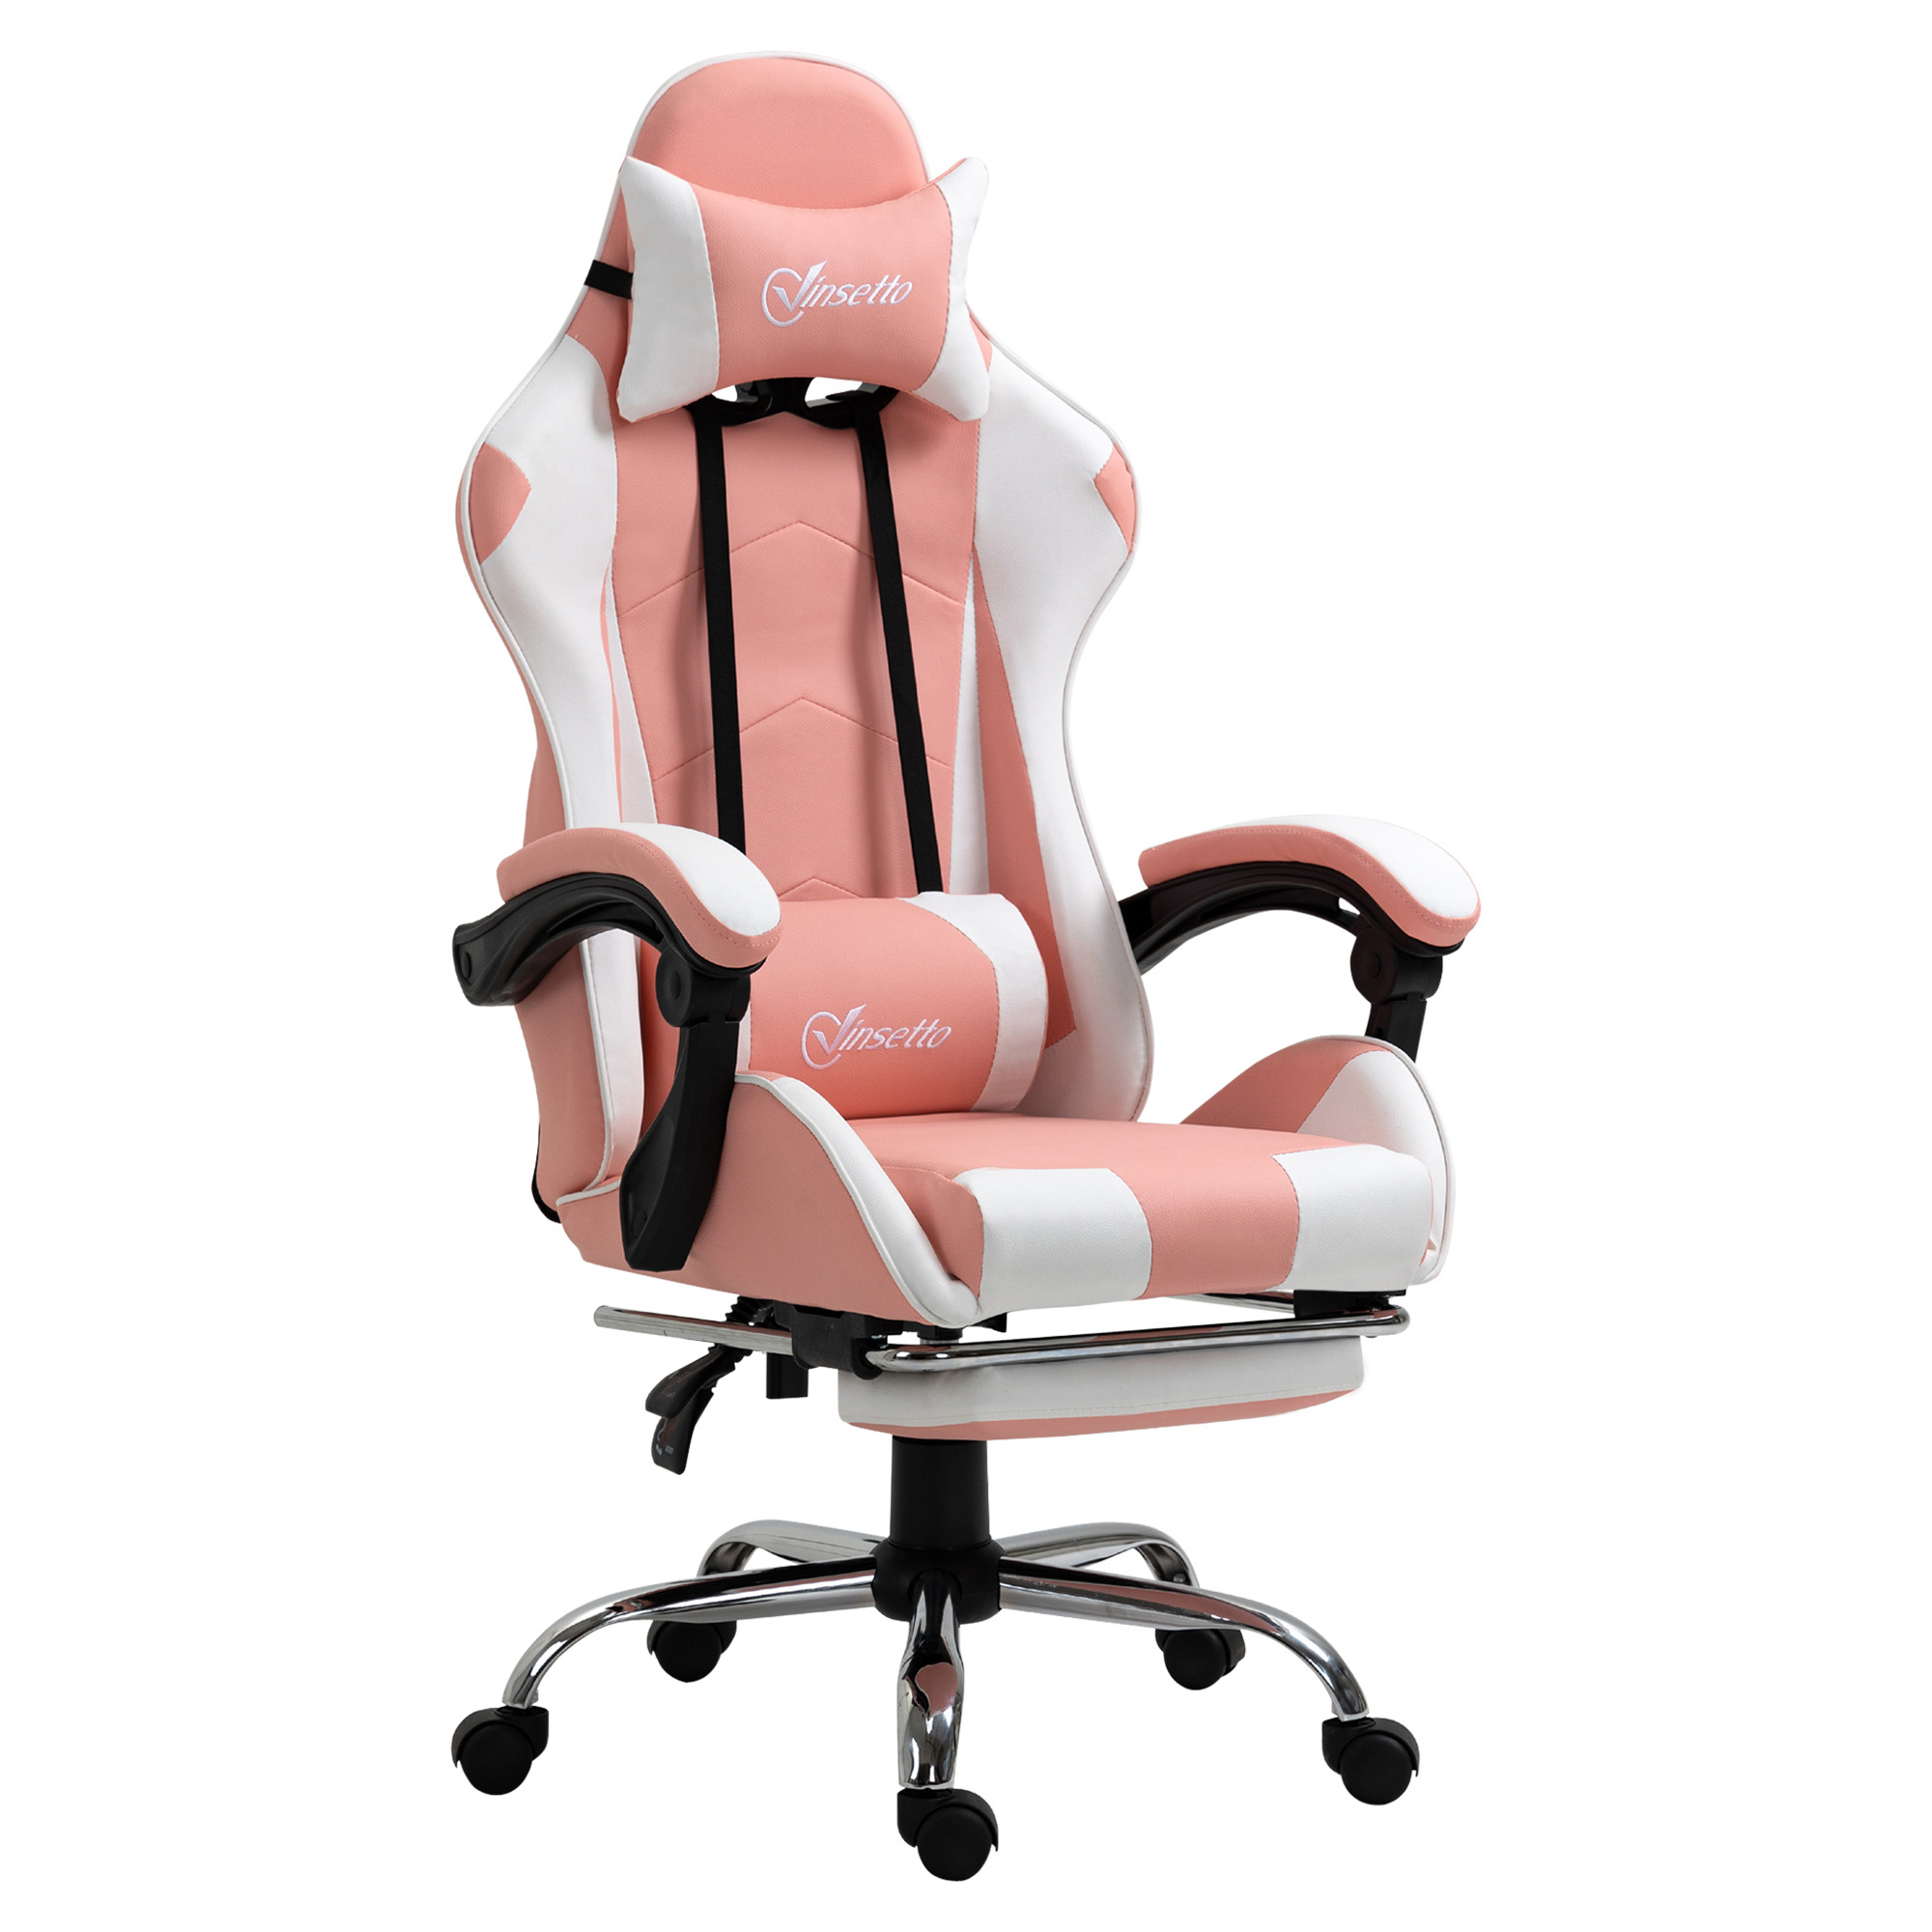 Vinsetto Racing Gaming Chair with Lumbar Support, Head Pillow, Swivel Wheels, High Back Recliner Gamer Desk Chair for Home Office, Pink